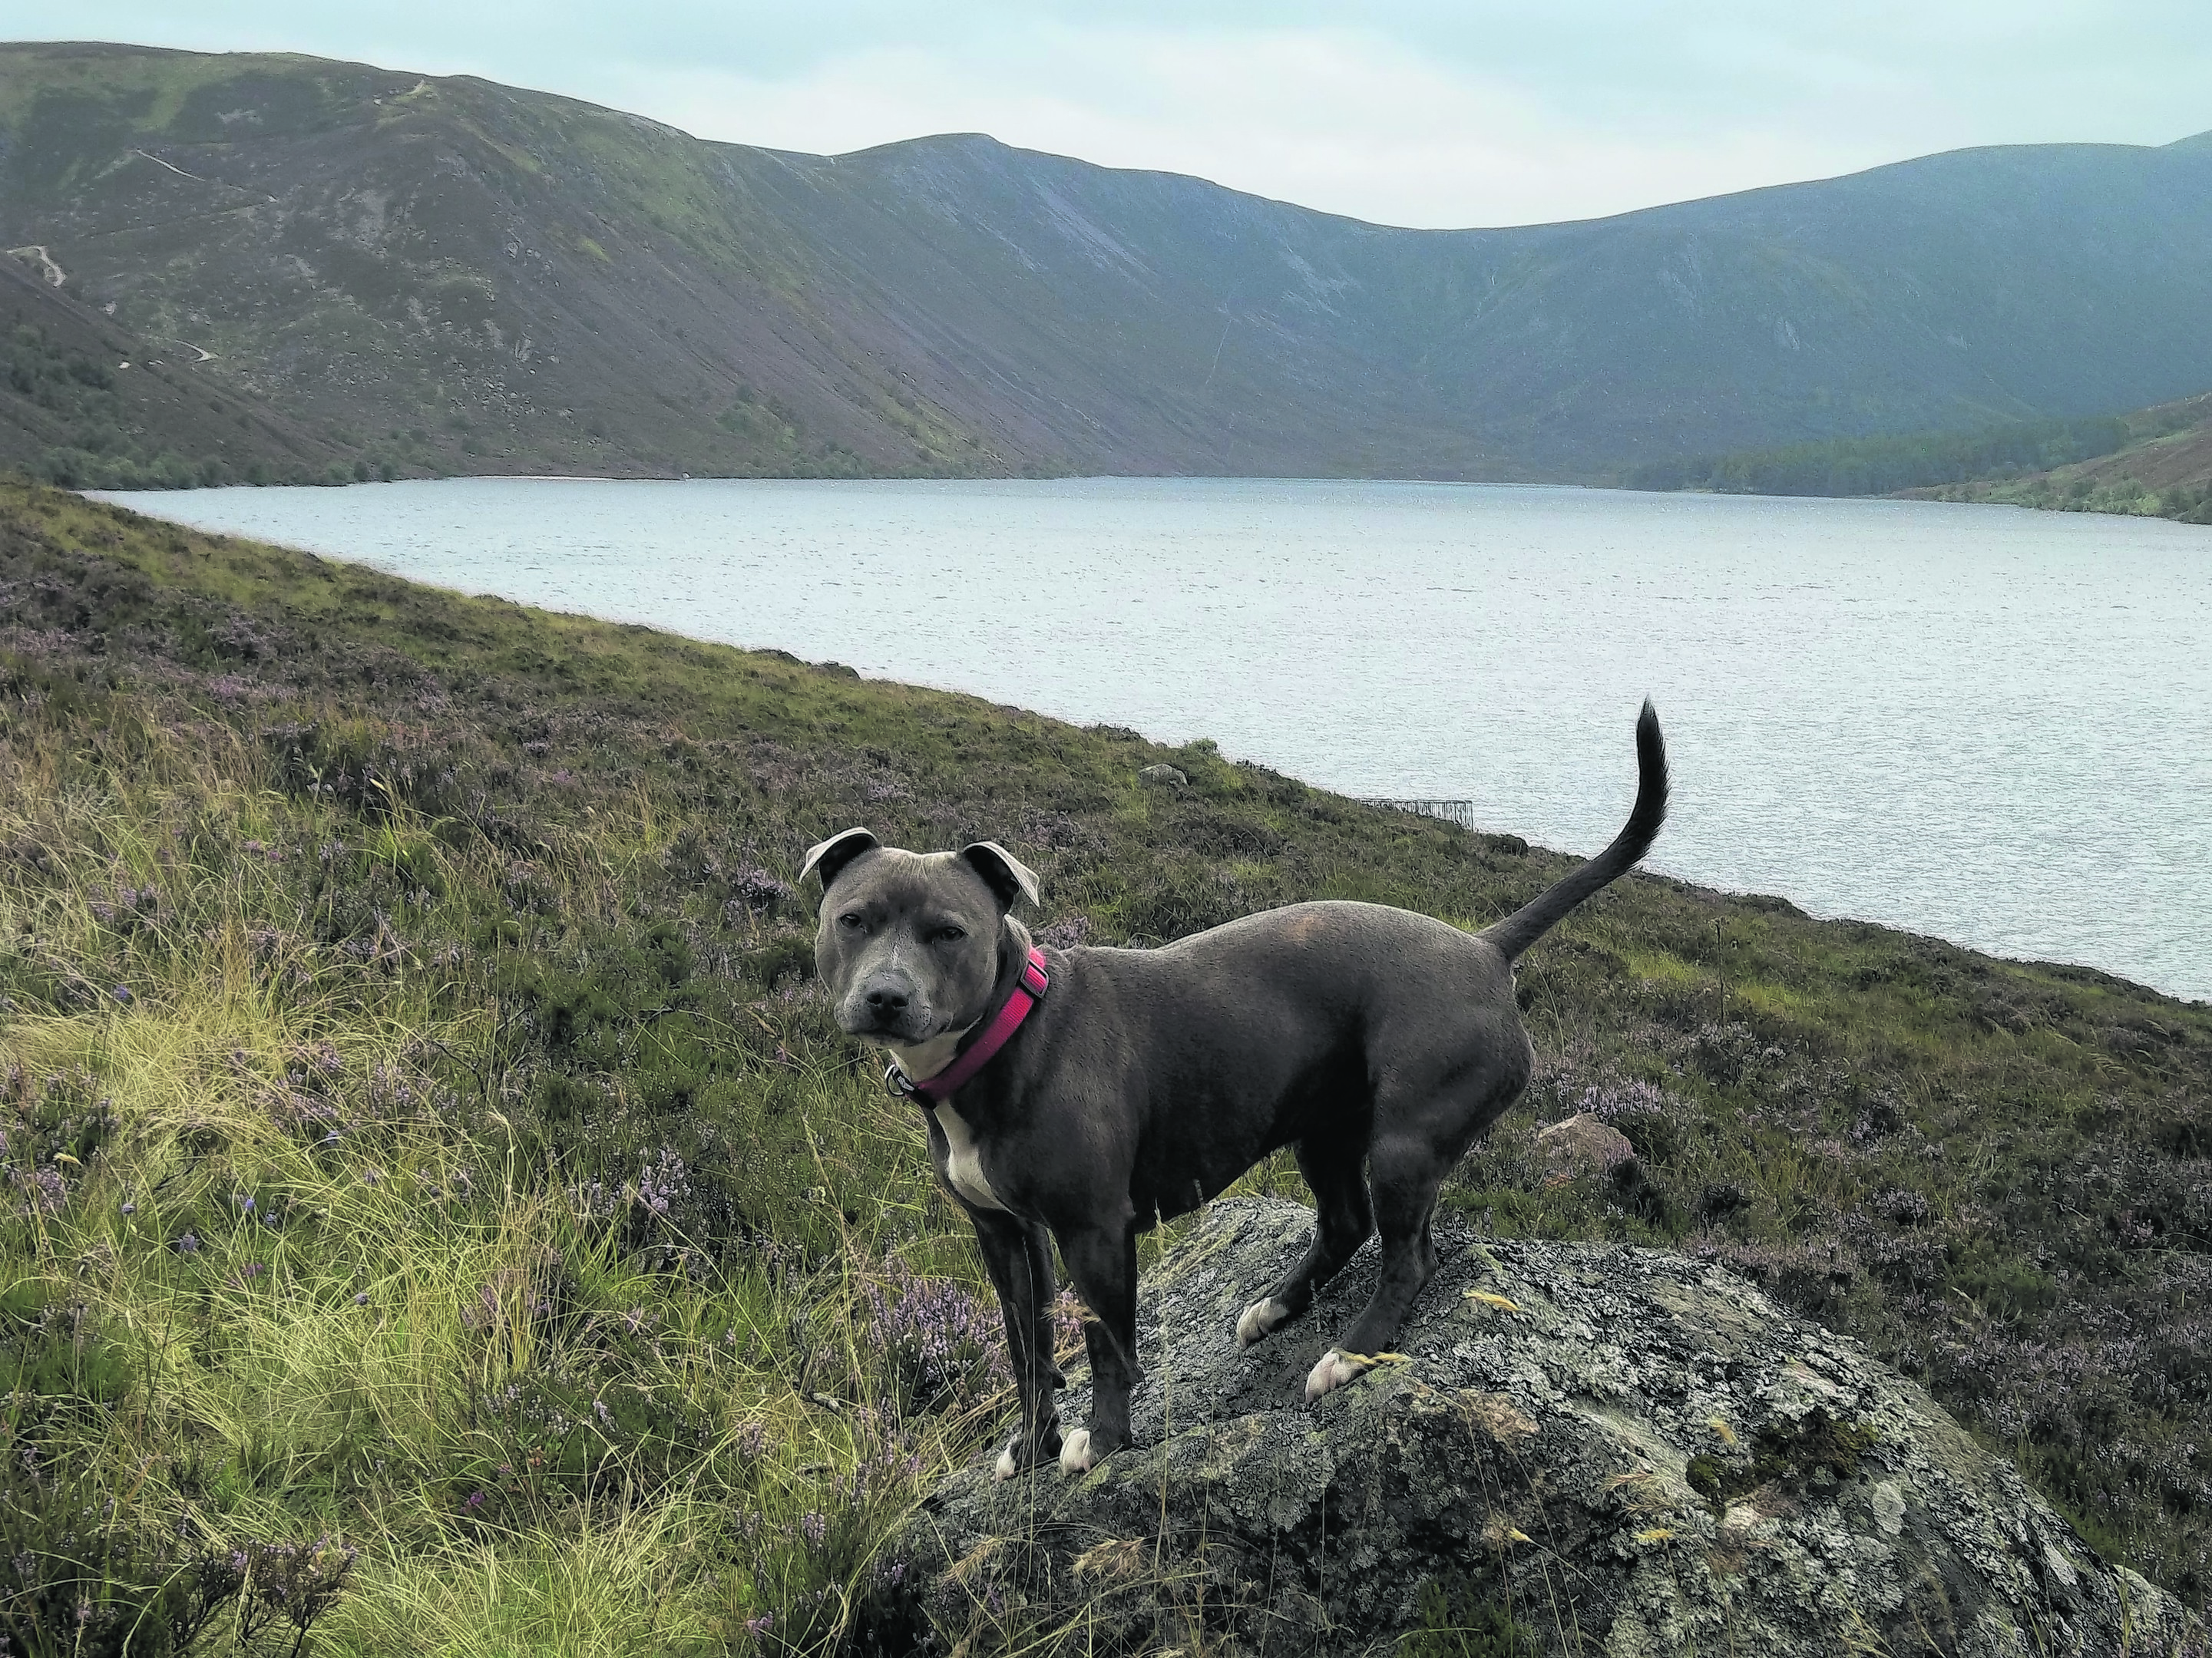 Blue is a two year old staffie who lives in Insch with the Robertson Family. This is her on the start of the walk around Loch Muick.